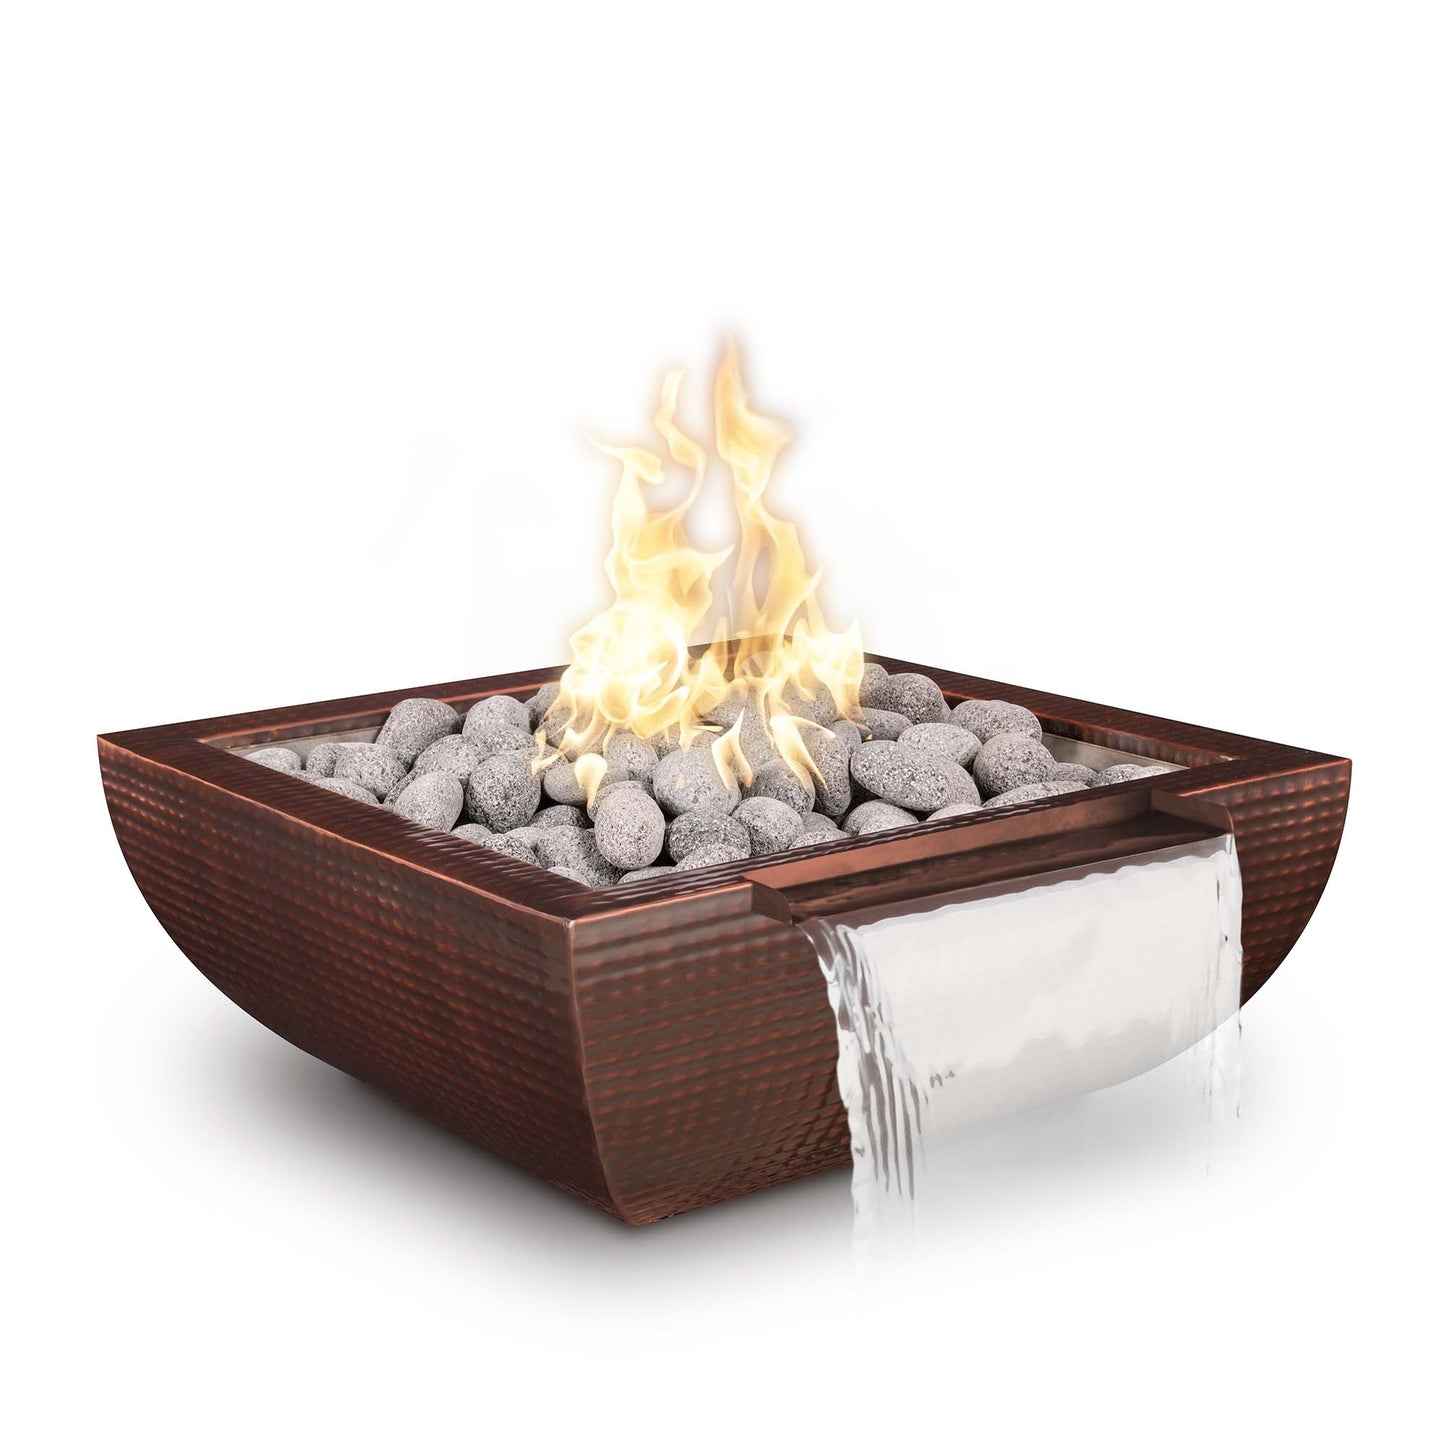 The Outdoor Plus Avalon Wide Spill 30" Copper Vein Powder Coated Metal Liquid Propane Fire & Water Bowl with Match Lit with Flame Sense Ignition